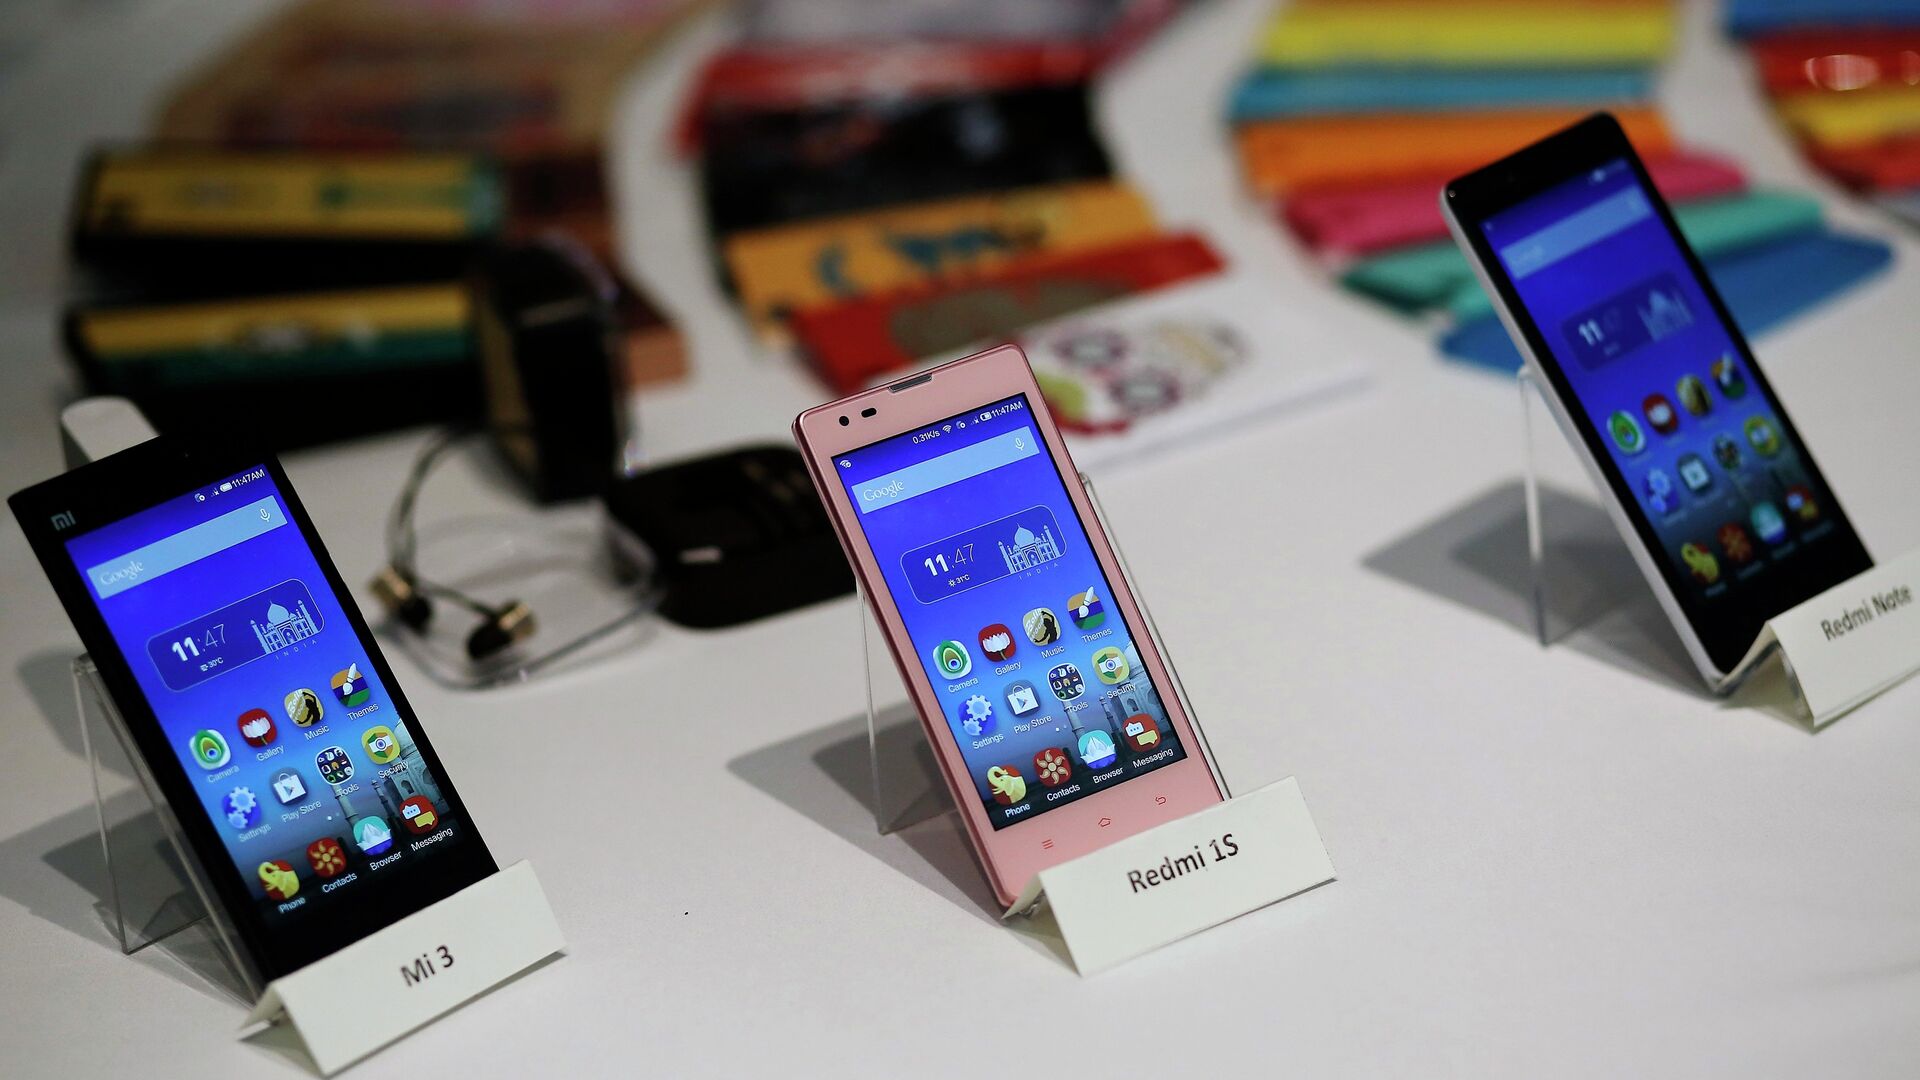 Three models of China's Xiaomi Mi phones are pictured during their launch in New Delhi in this July 15, 2014 file photo - Sputnik International, 1920, 22.12.2021